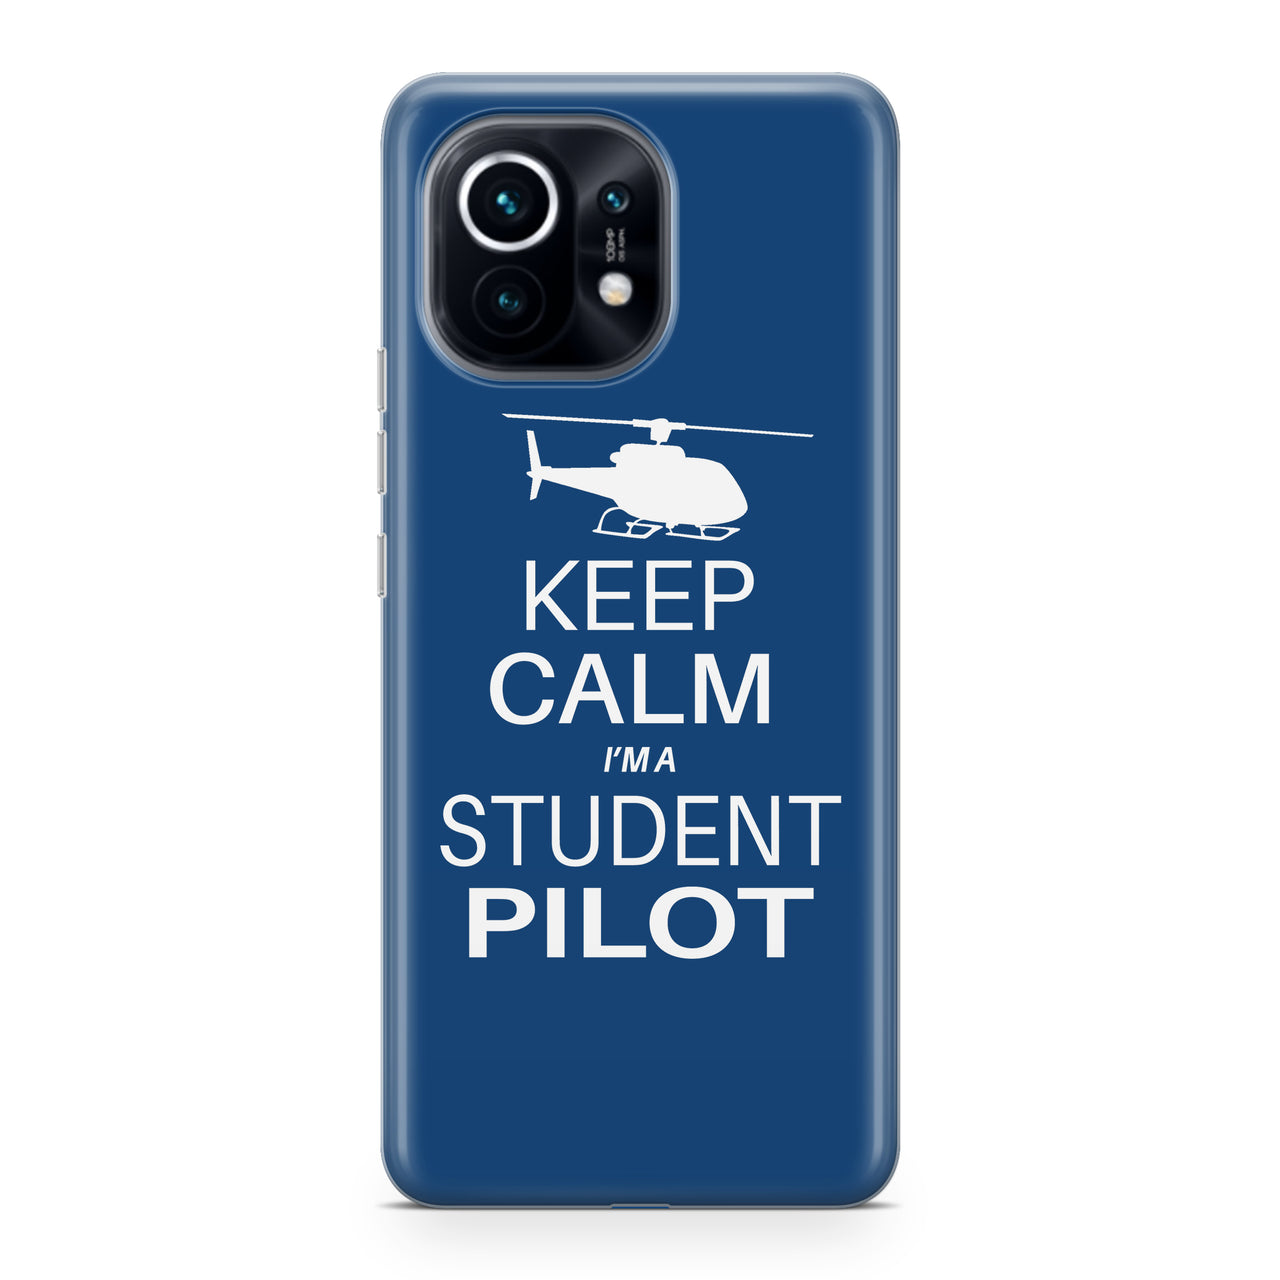 Student Pilot (Helicopter) Designed Xiaomi Cases